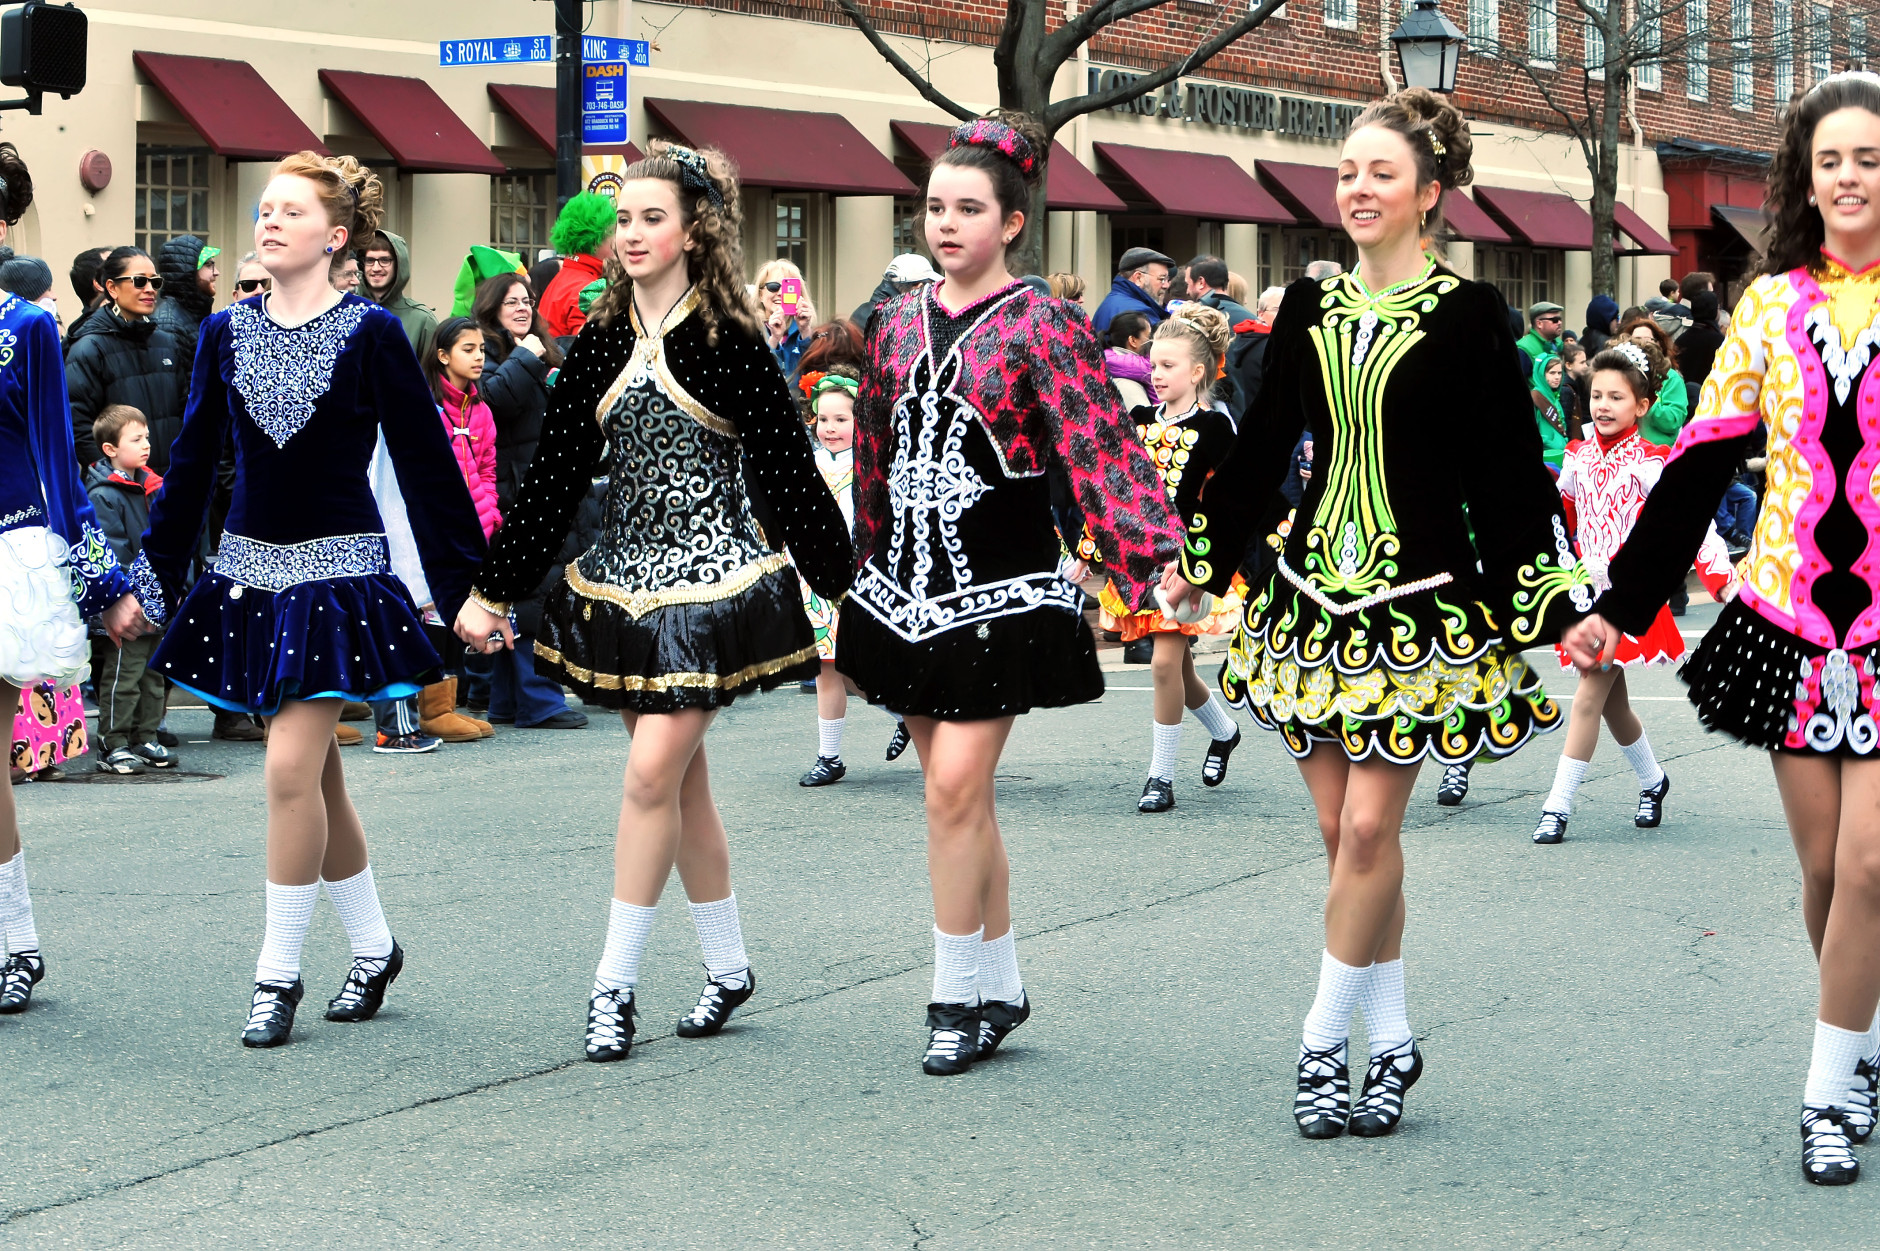 Irish step dancers perform at the Ballyshaners Annual Old Town Alexandria Saint Patrick’s Day Parade on Saturday, March 5, 2016. (Photo Shannon Finney/Shannon Finney Photography)
